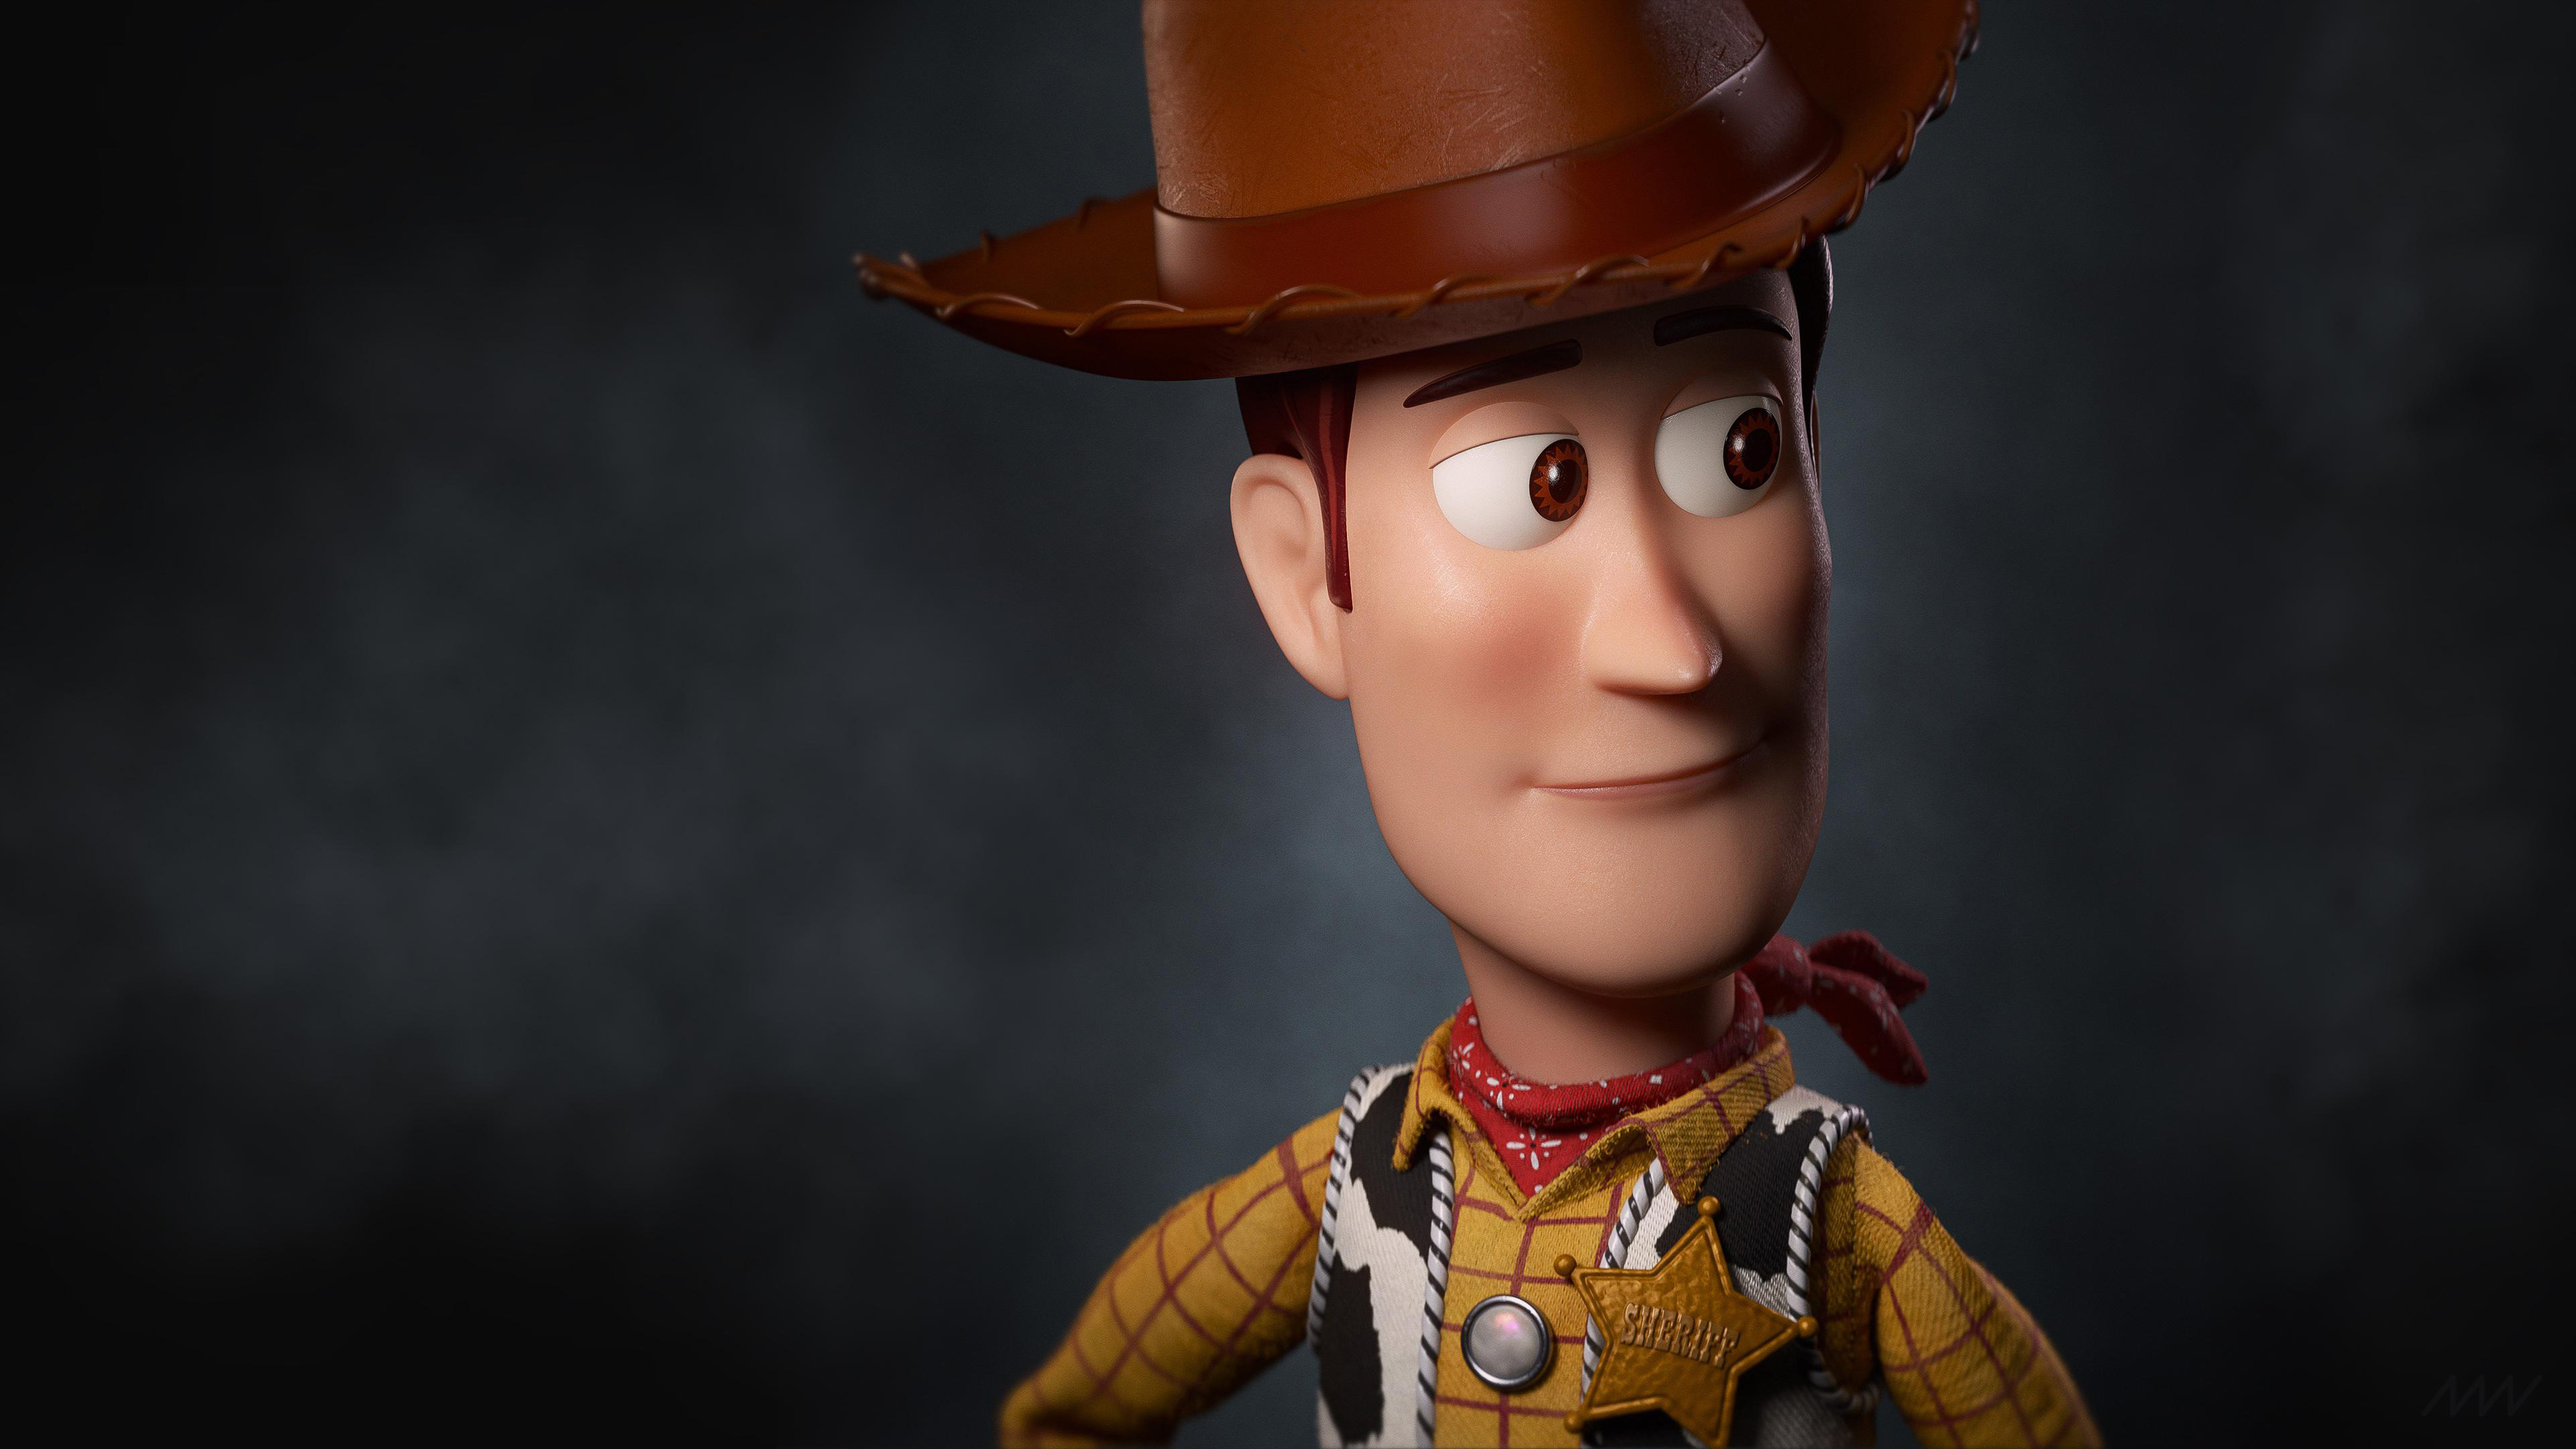 download woody doll